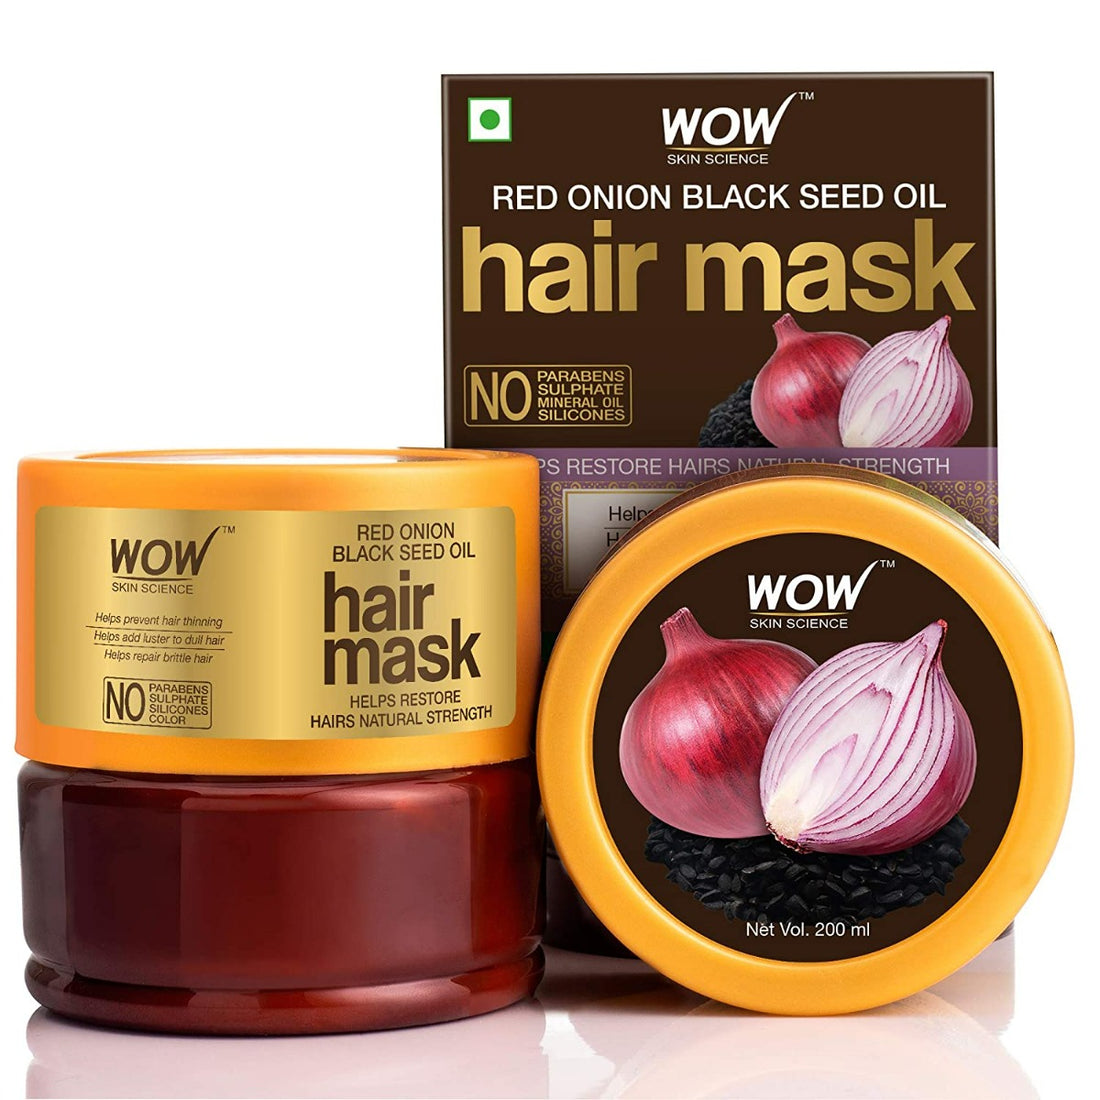 Wow Skin Science Onion Red Seed Oil Hair Mask (200ml)